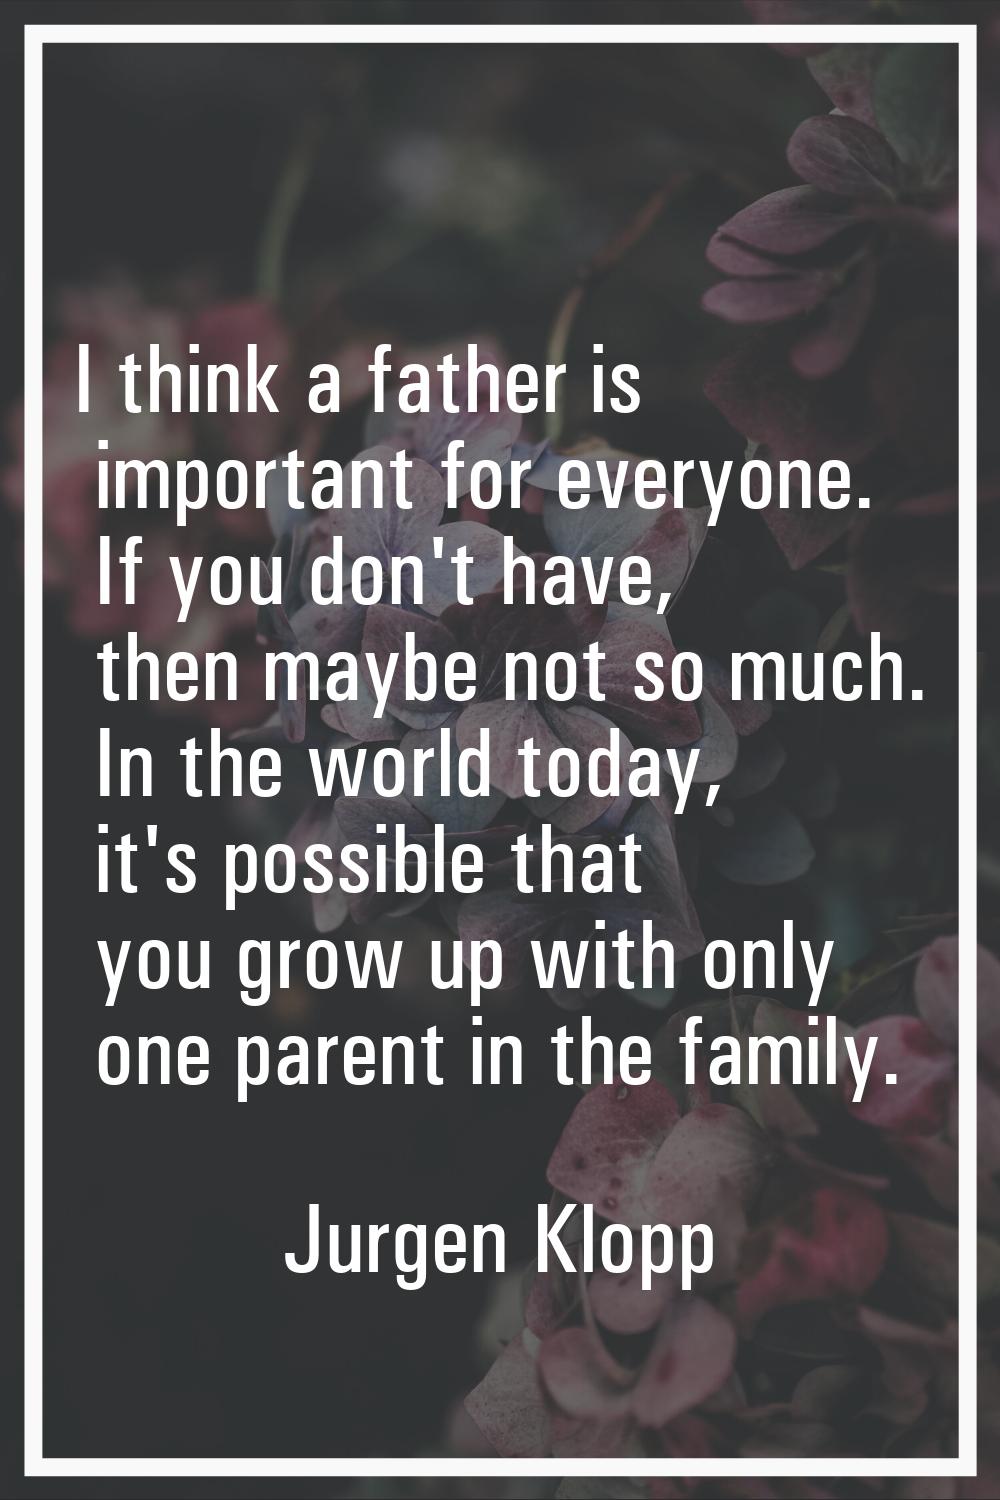 I think a father is important for everyone. If you don't have, then maybe not so much. In the world